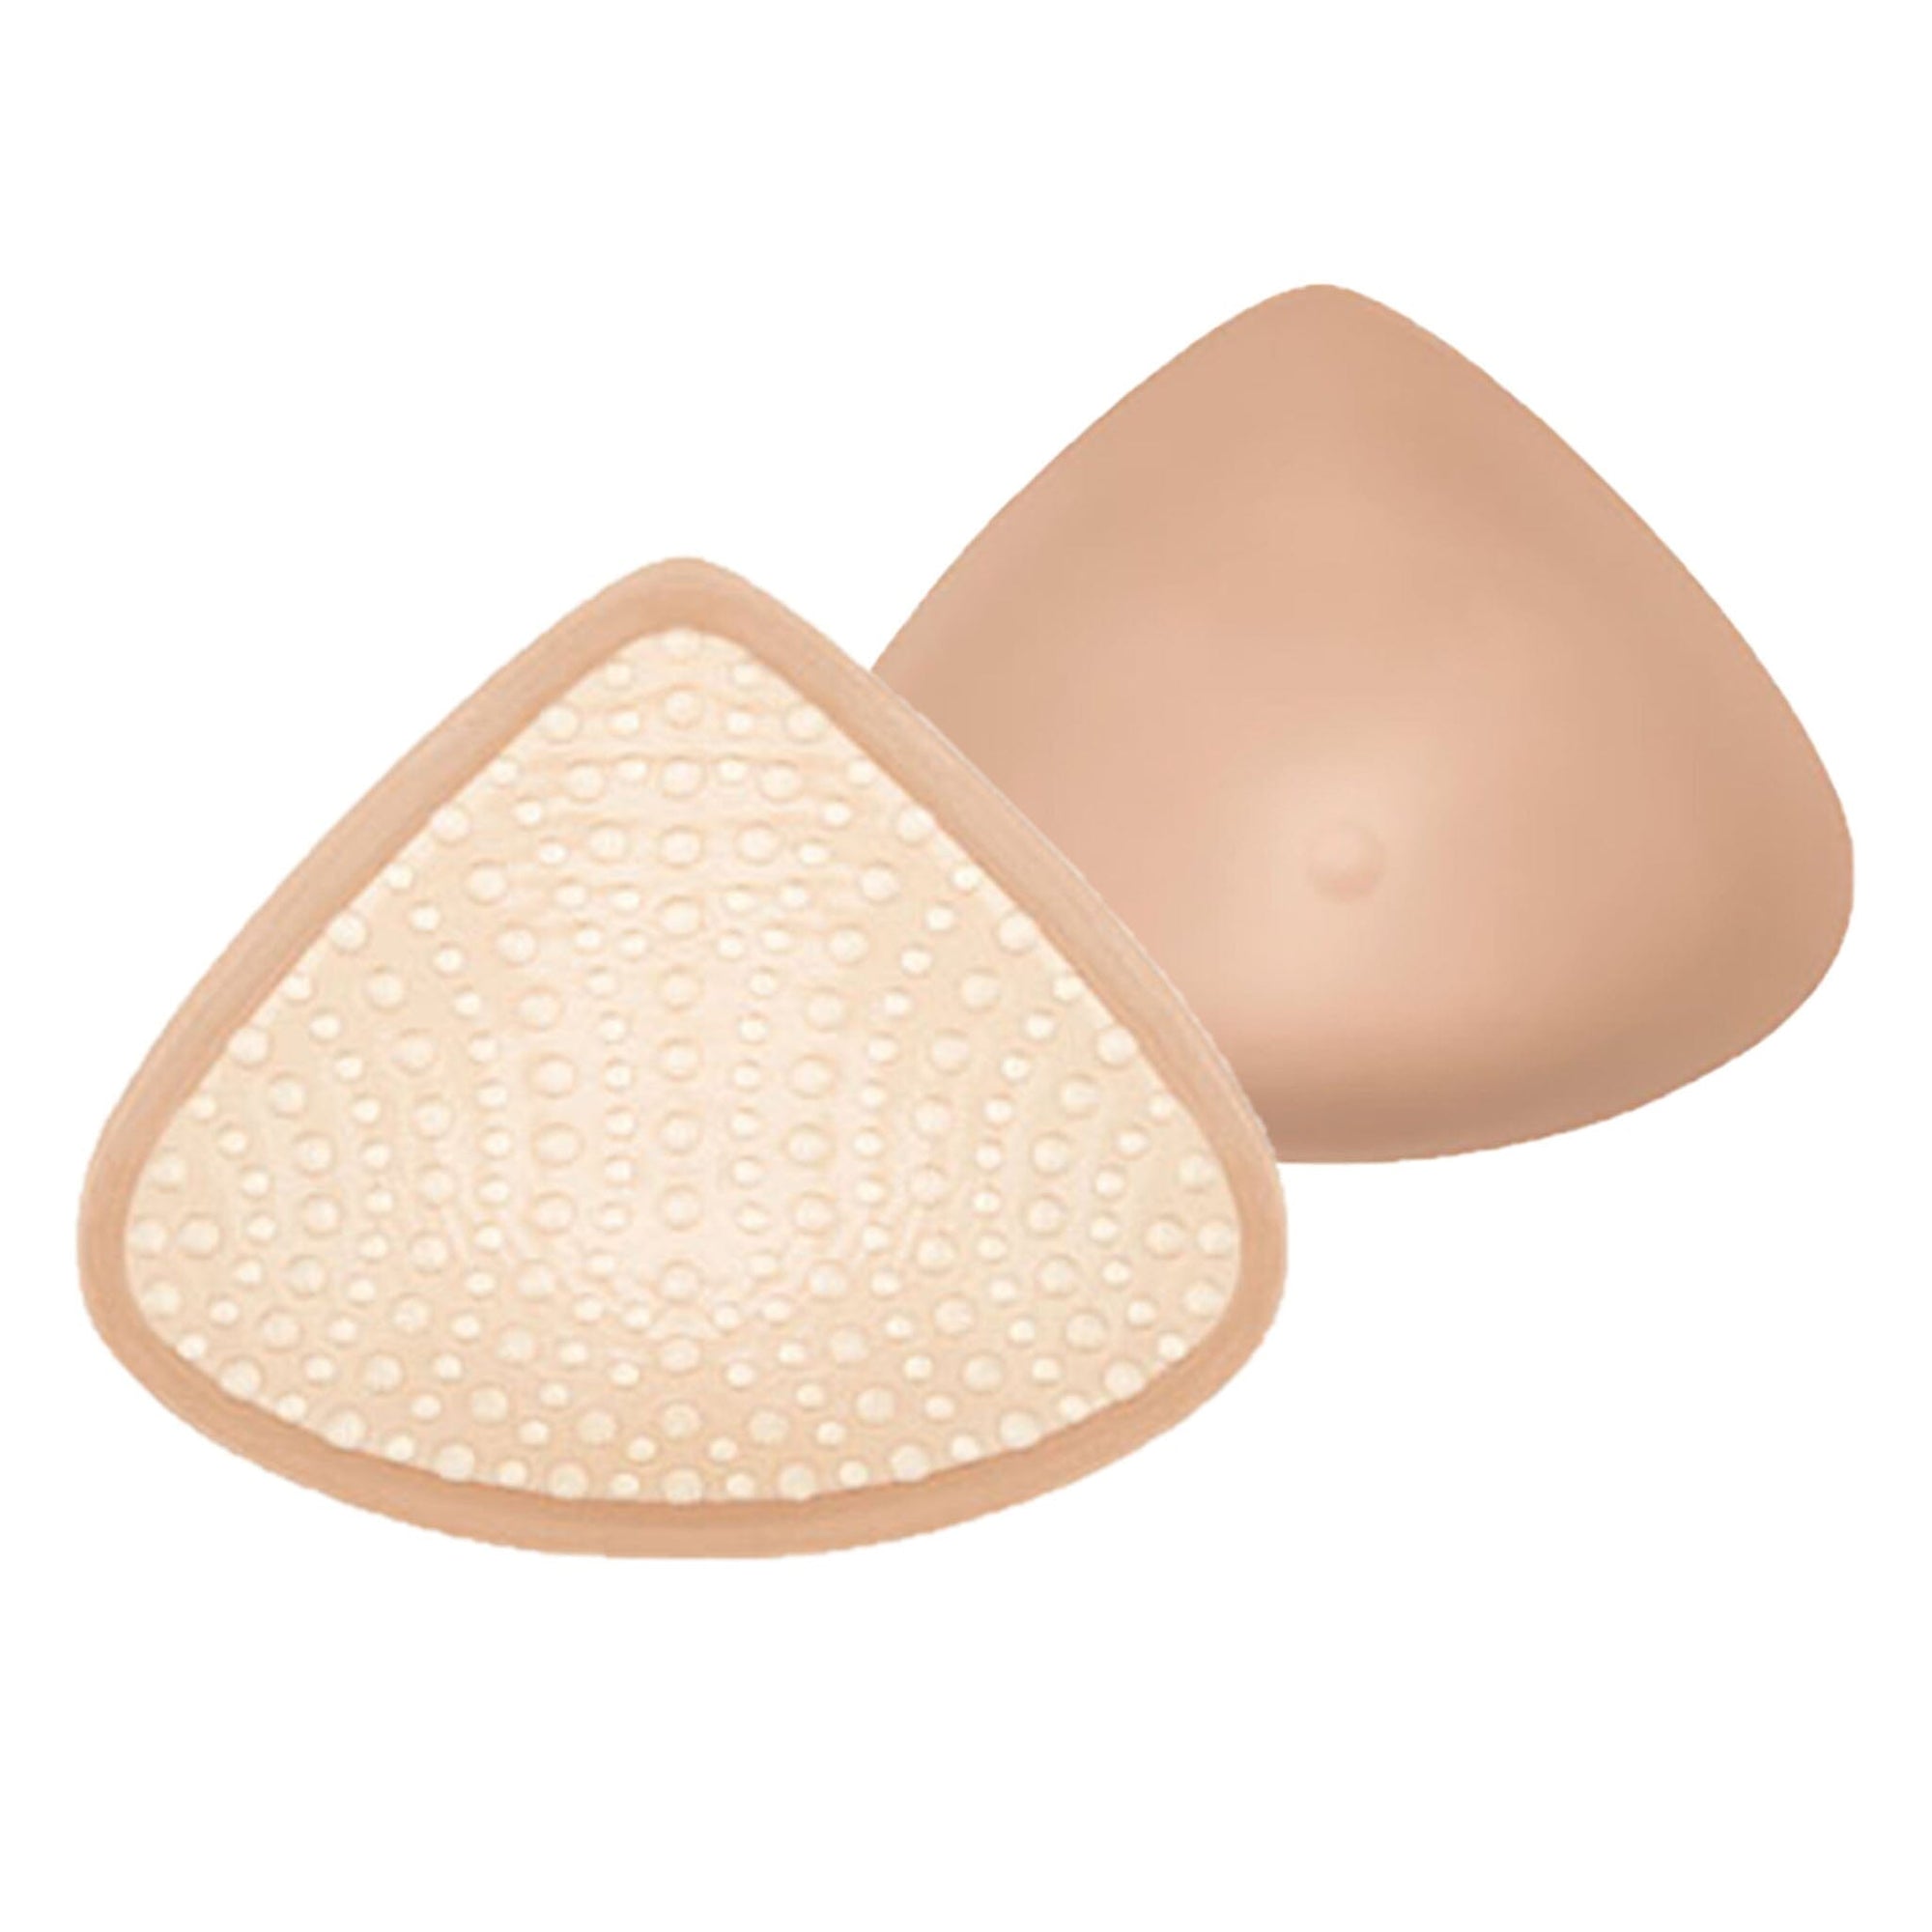 How To Fit Self- Adhesive Silicone Breast Form – Amoena Contact Fitting  Guide 